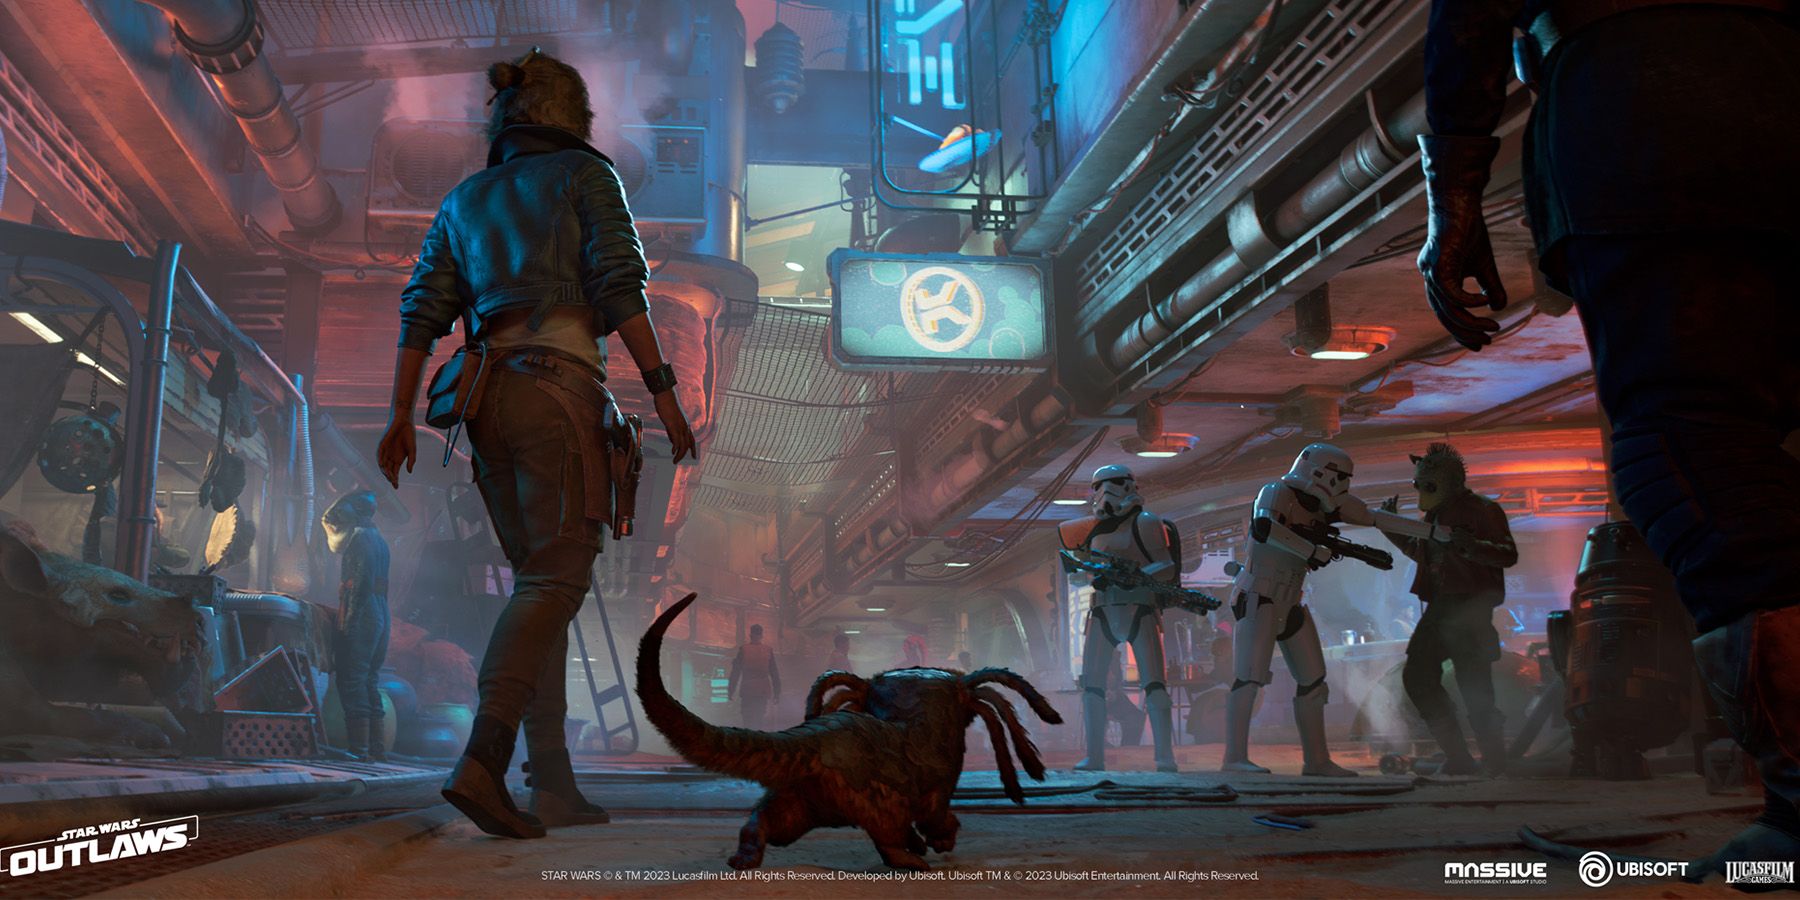 Star Wars Outlaws 'Steals' One of Fallout's Best Features